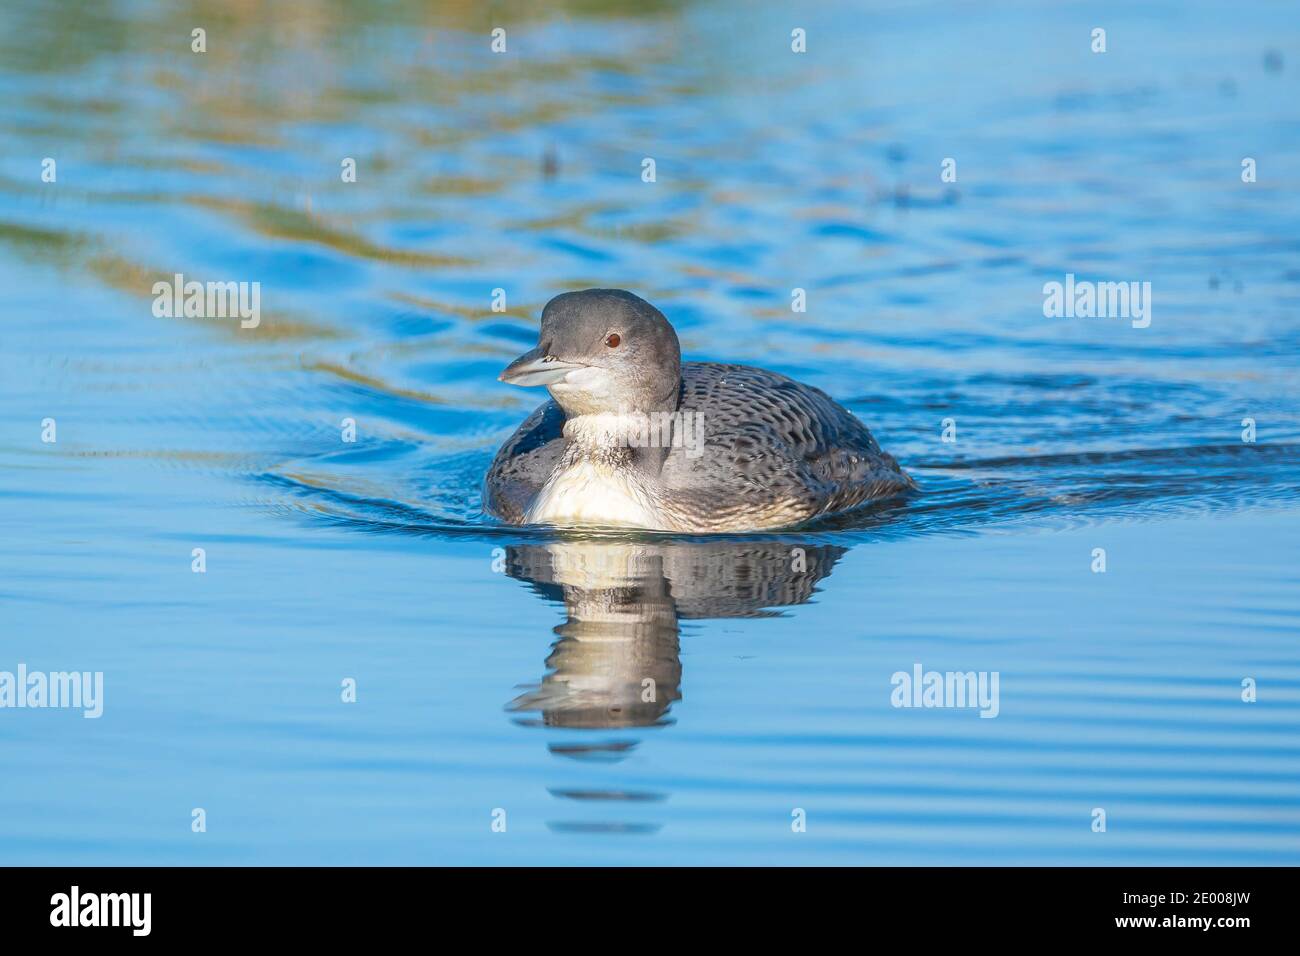 Closeup of a Common loon, Gavia immer, also known as the great northern diver or great northern loon hunting and eating crayfish Stock Photo